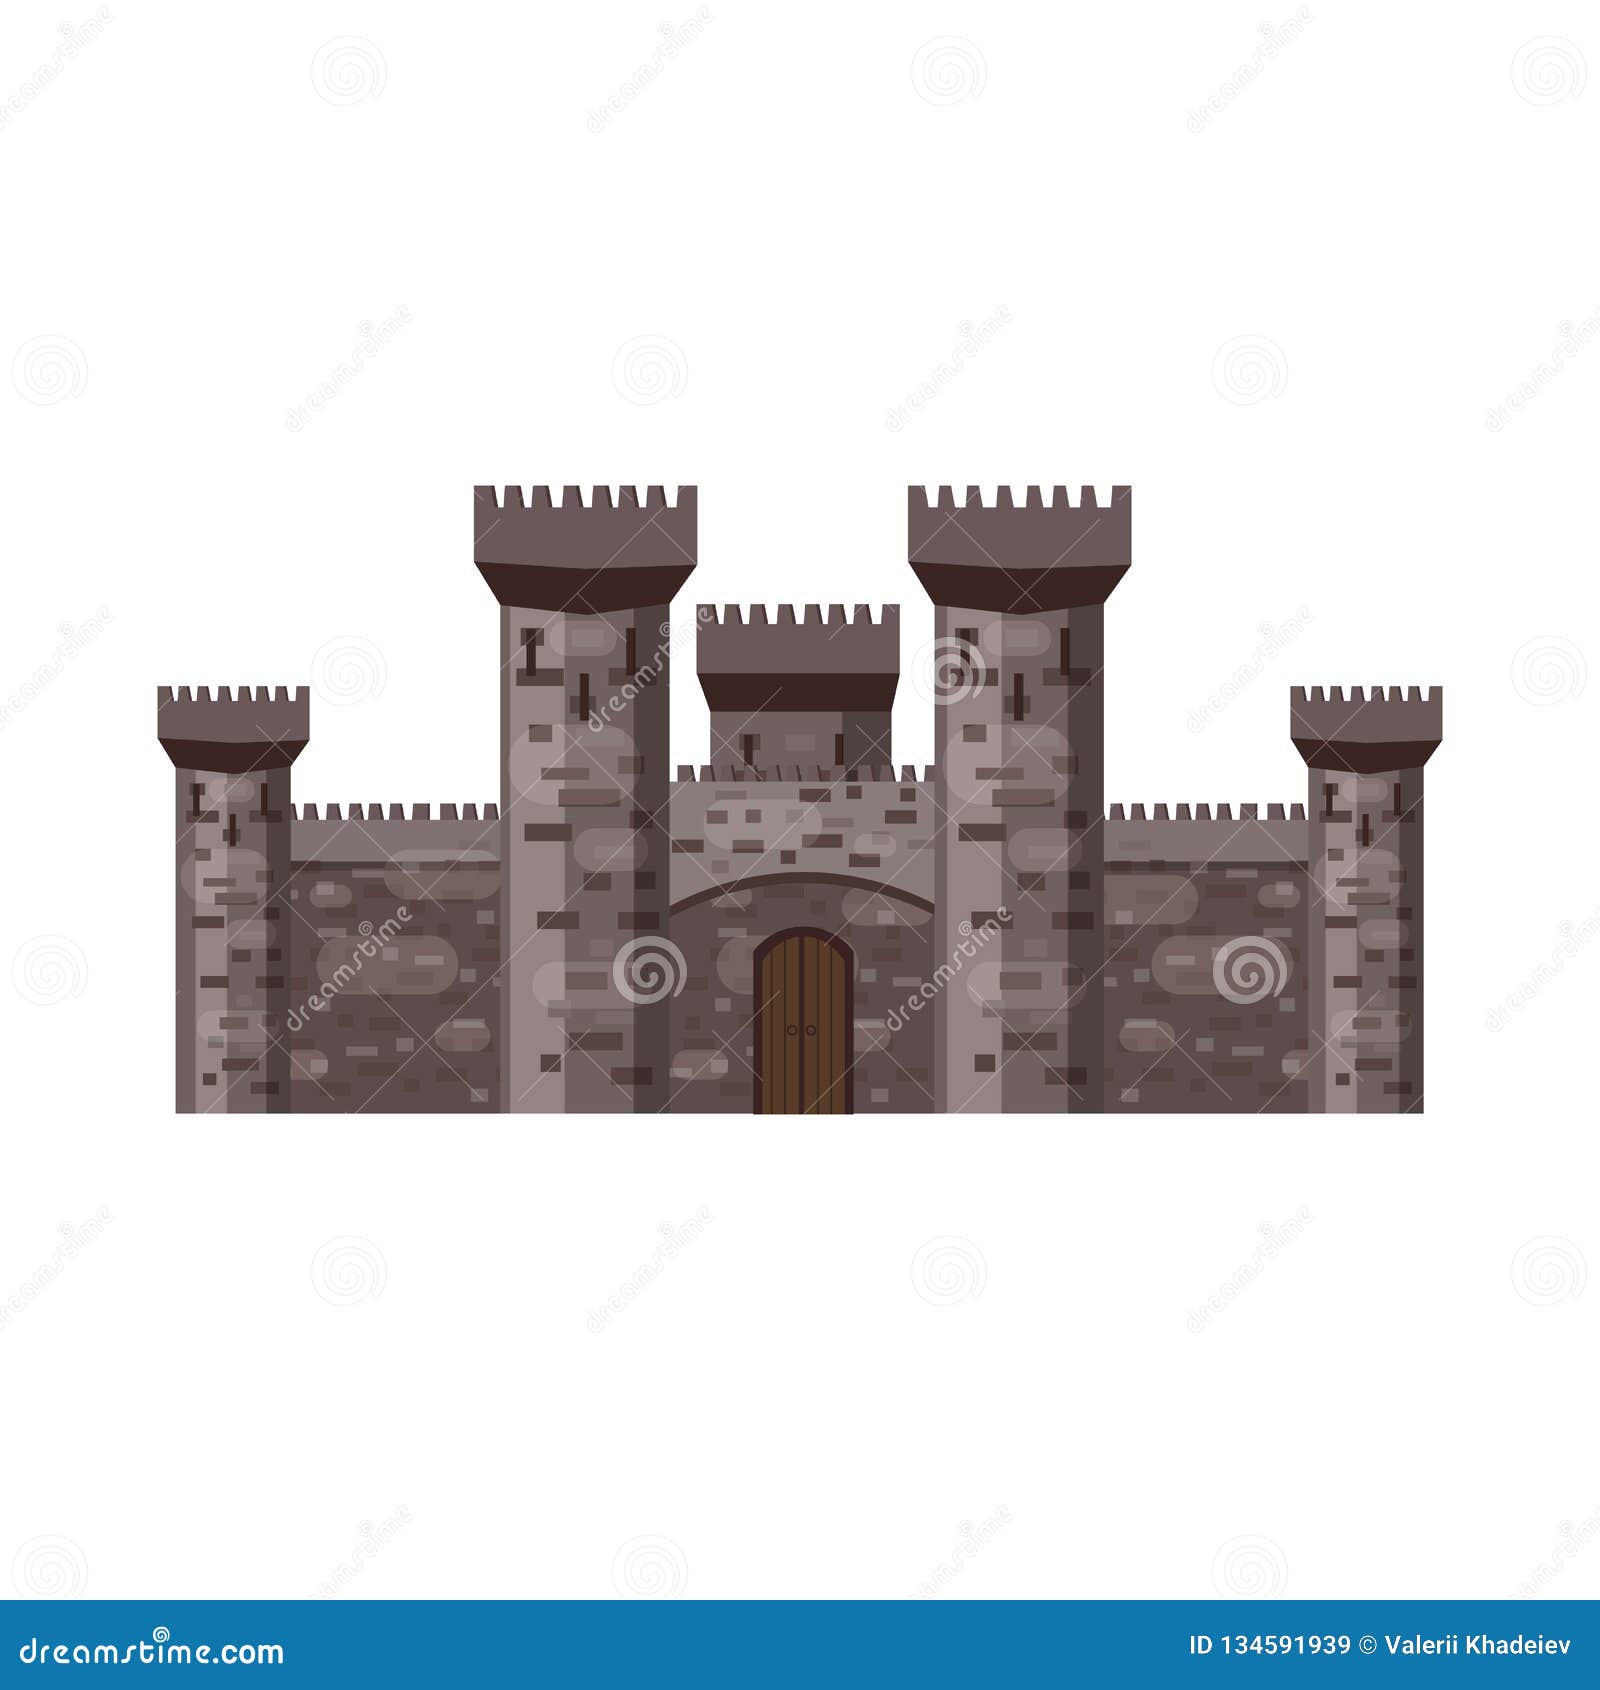 castle, fortress, ancient, architecture middle ages europe, medieval palace with high towers, , banners, 